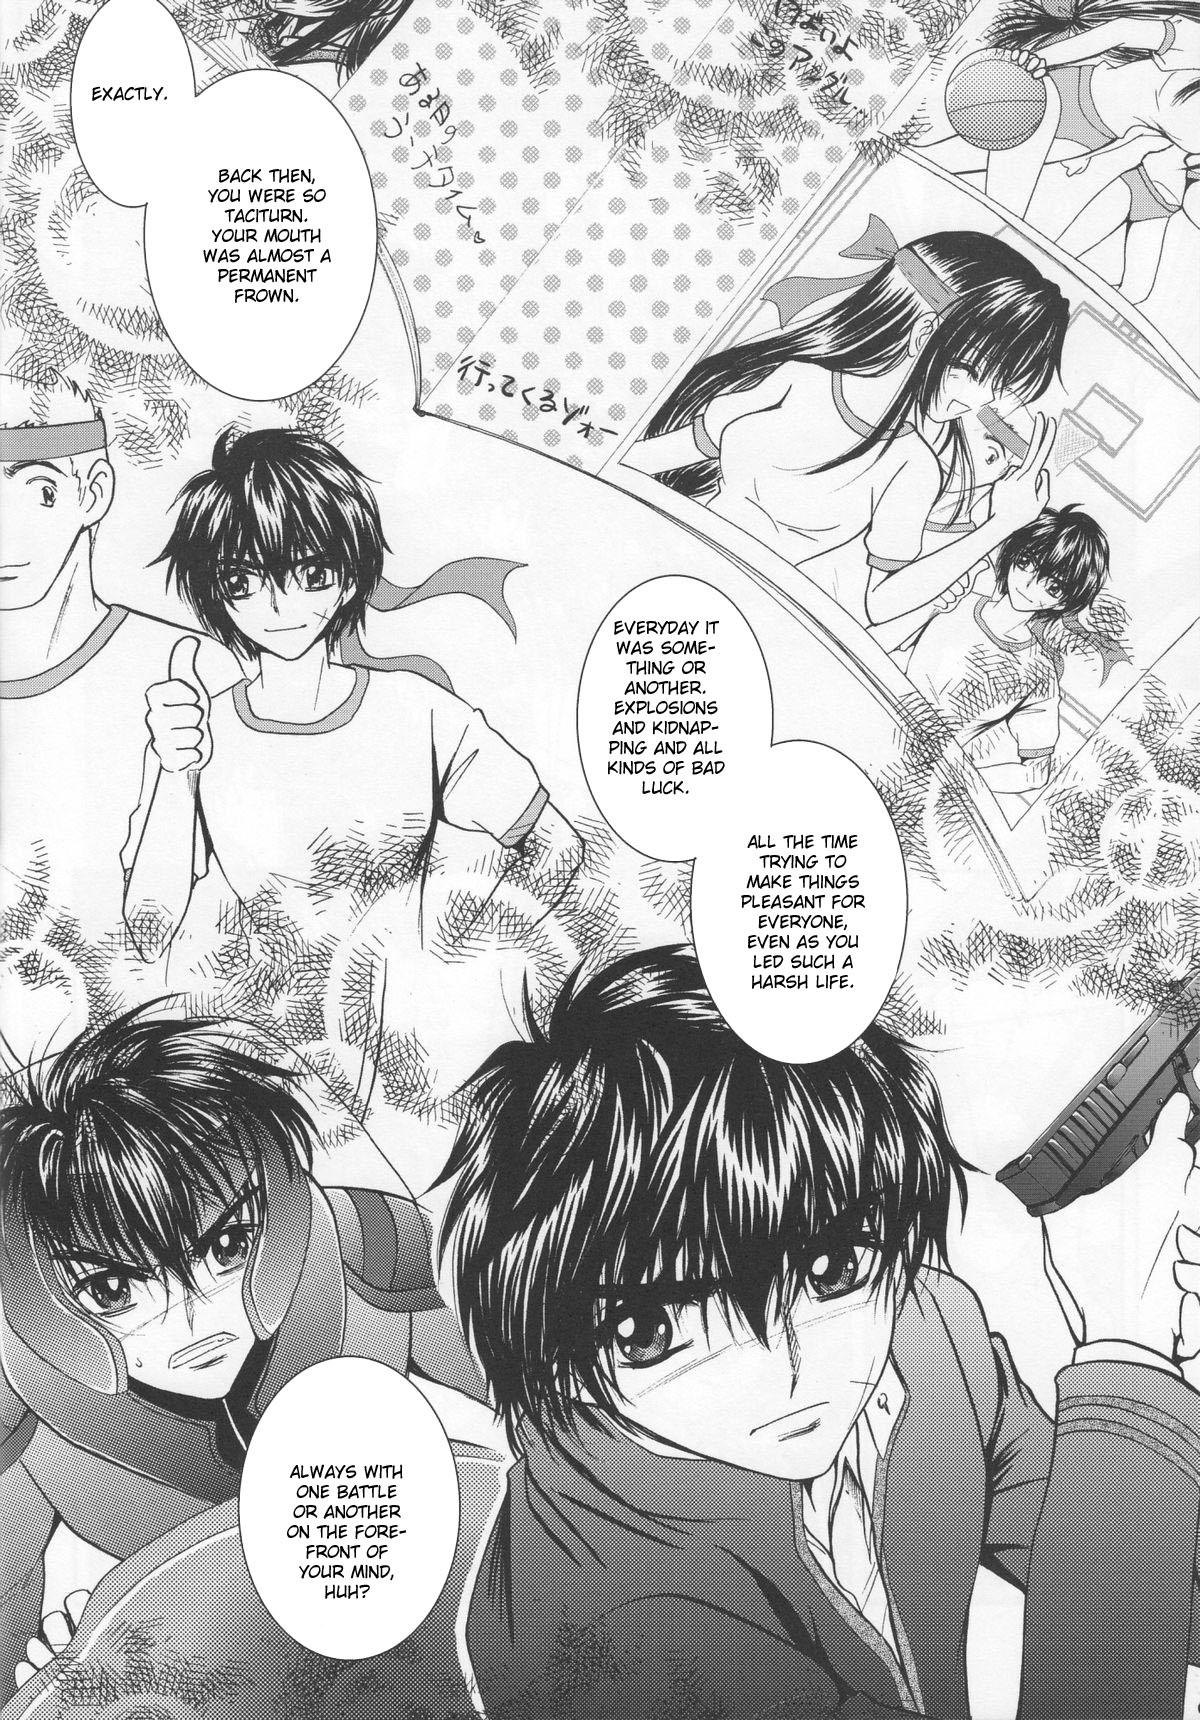 Bwc SEXY PANIC Yappari Sei ga Ichiban!? | Sexy Panic: Their First Time is Without Protection!? - Full metal panic Cowgirl - Page 5